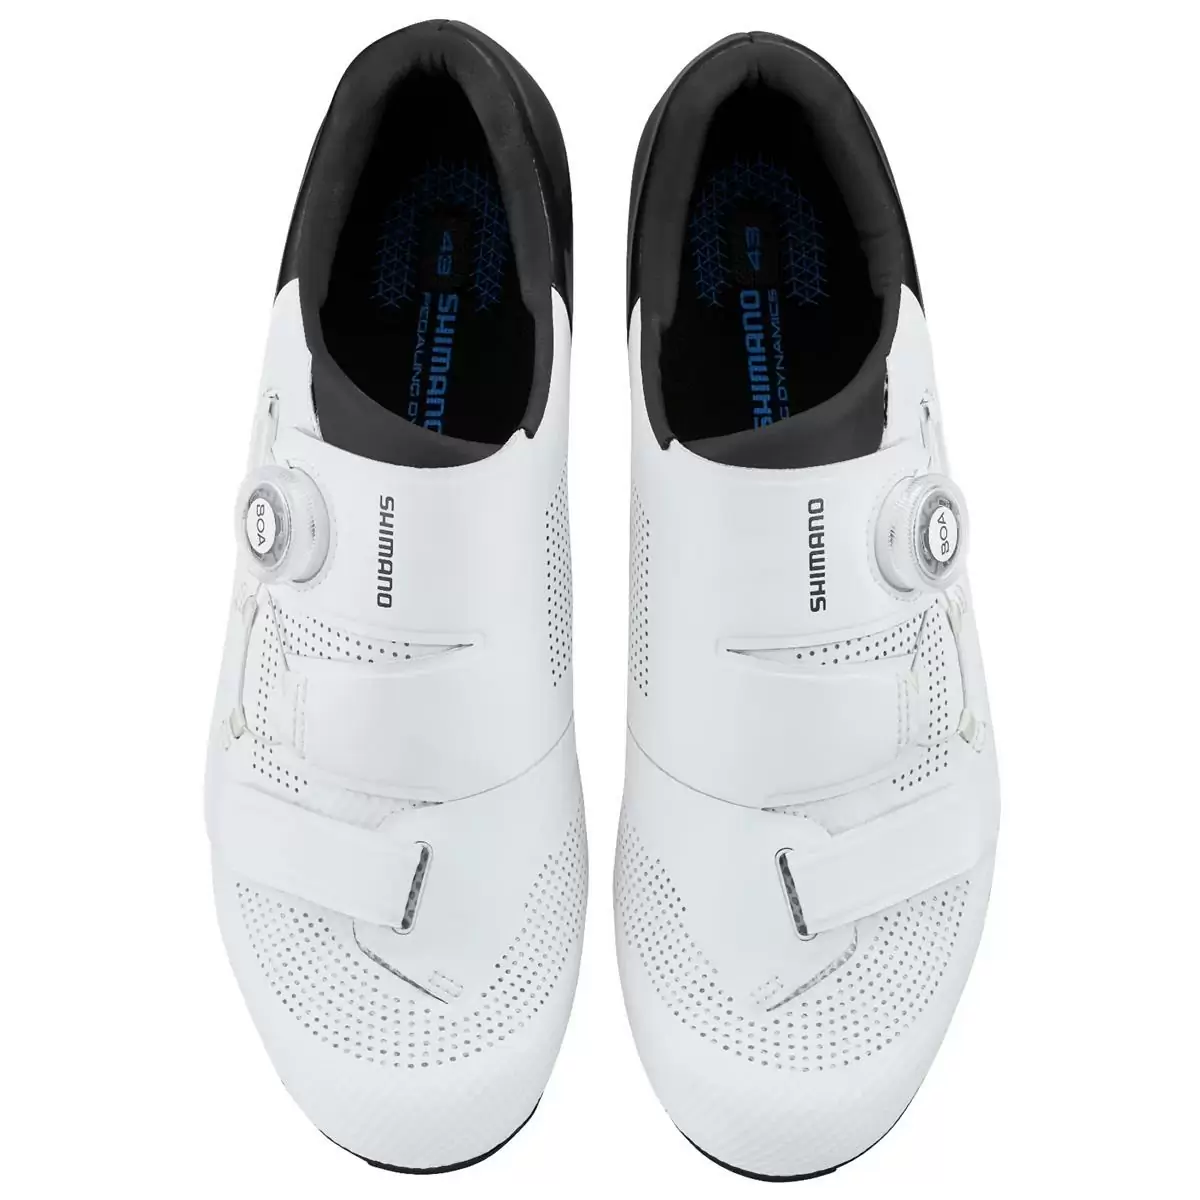 Chaussures route RC SH-RC502 Blanc taille 39 #1